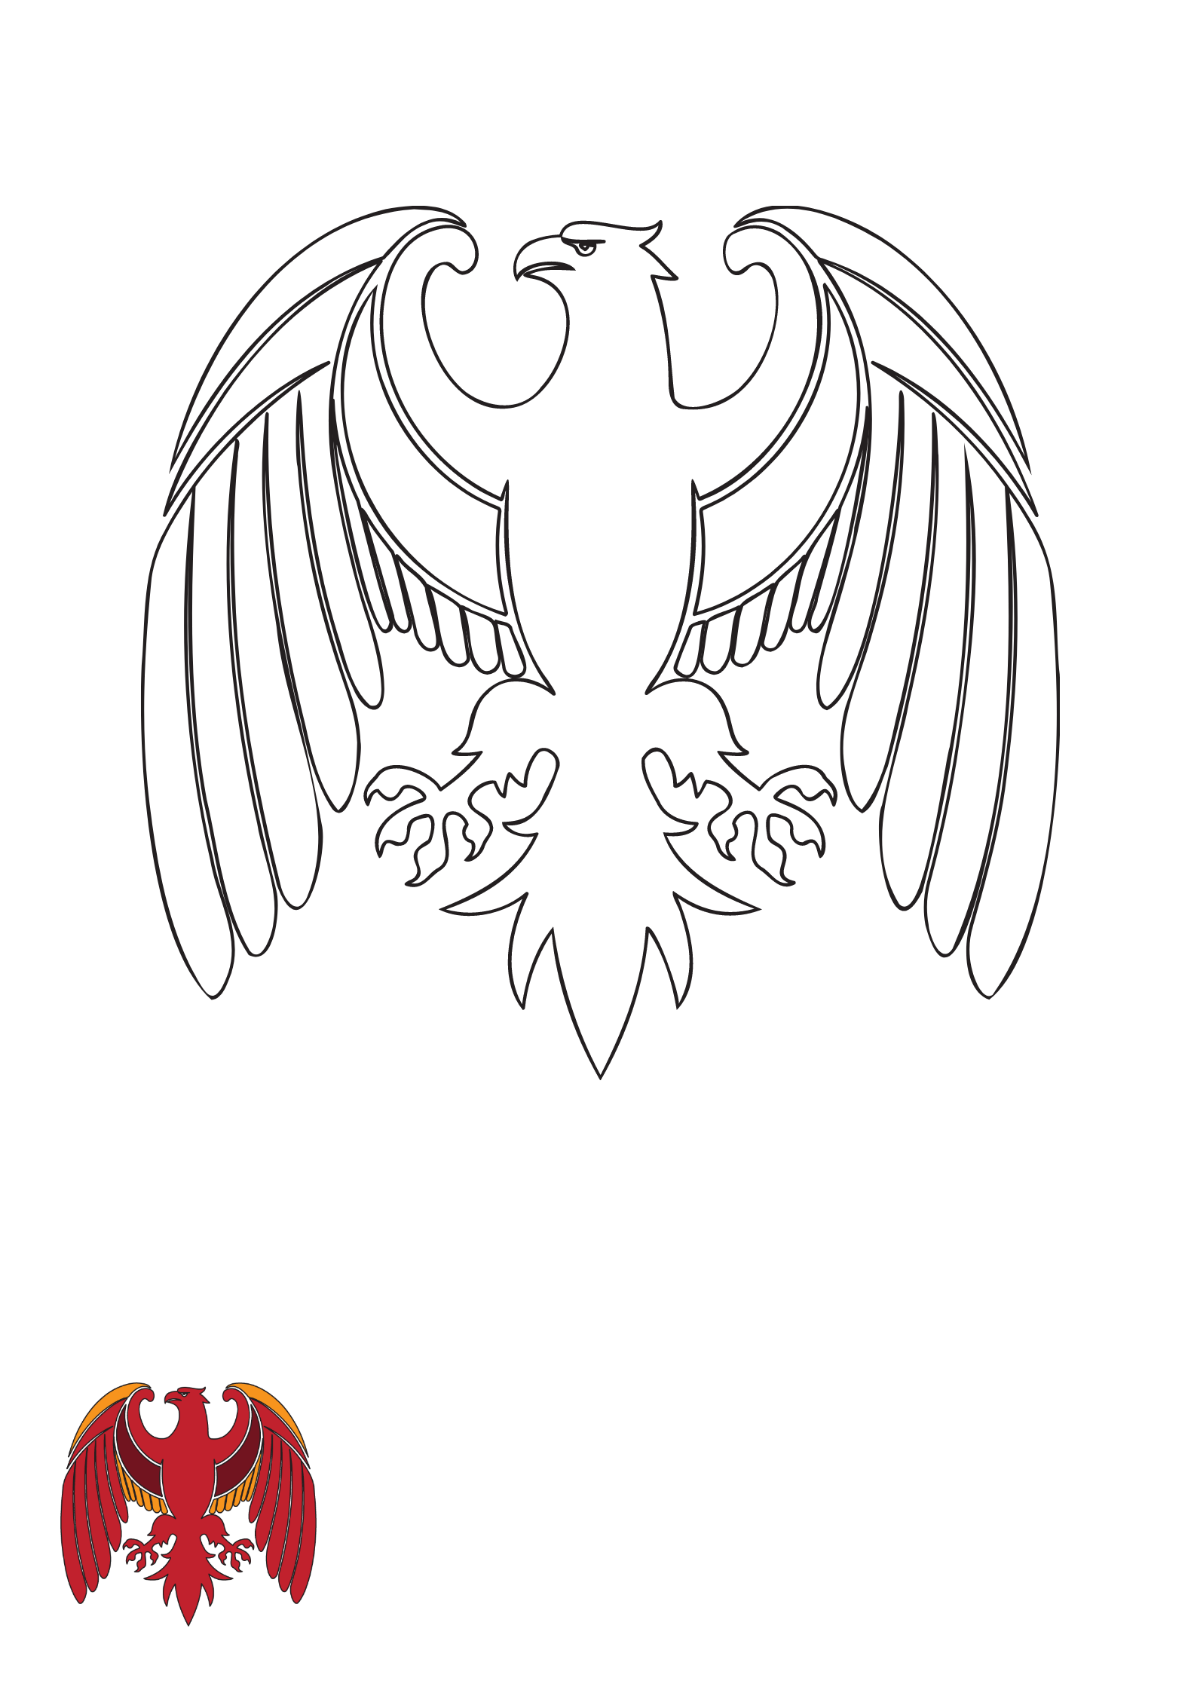 Heraldic Eagle coloring page Template